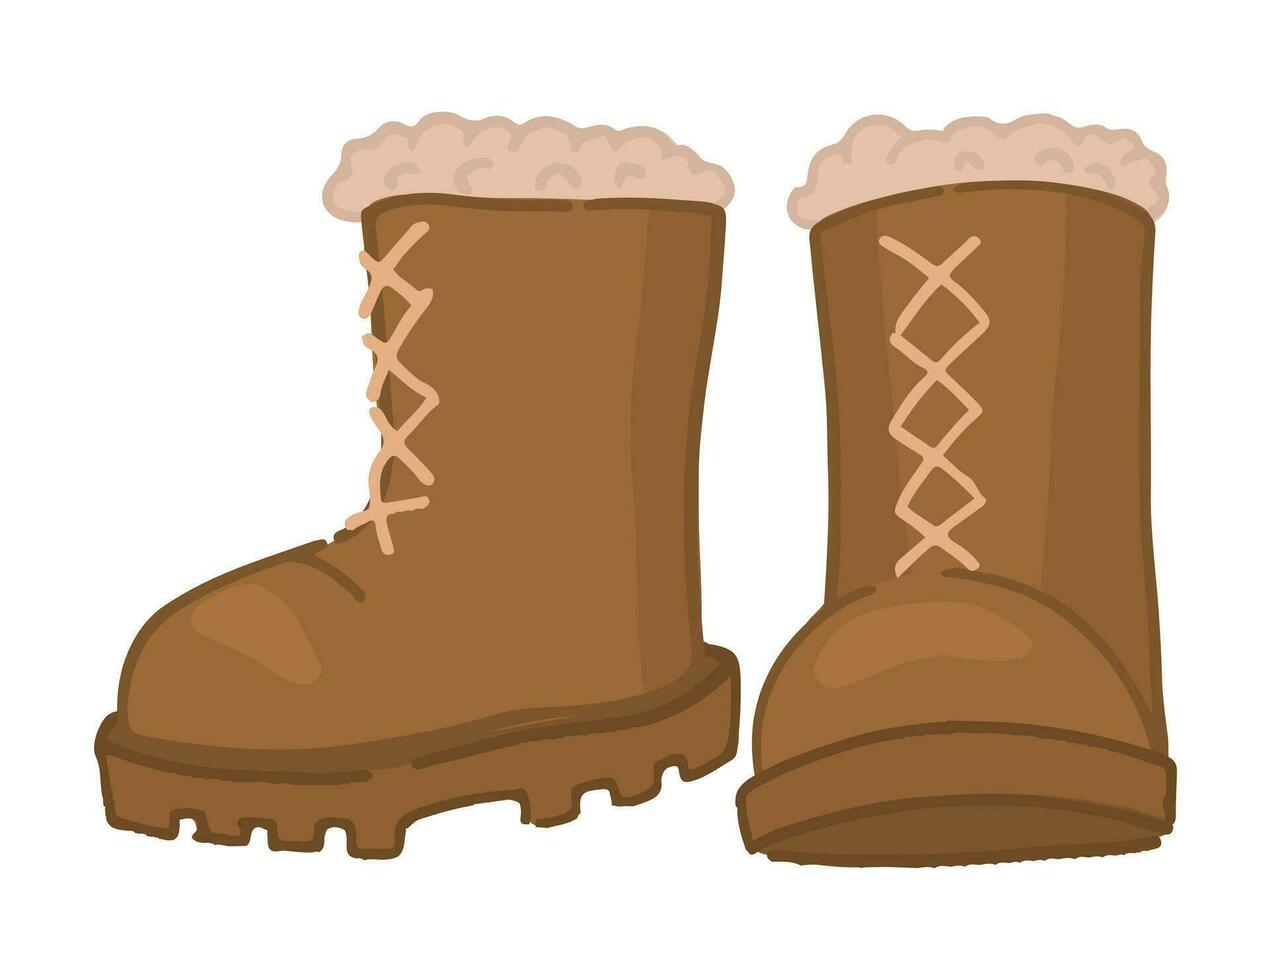 Doodle of warm boots. Cartoon clipart of winter footwear. Contemporary vector illustration isolated on white background.